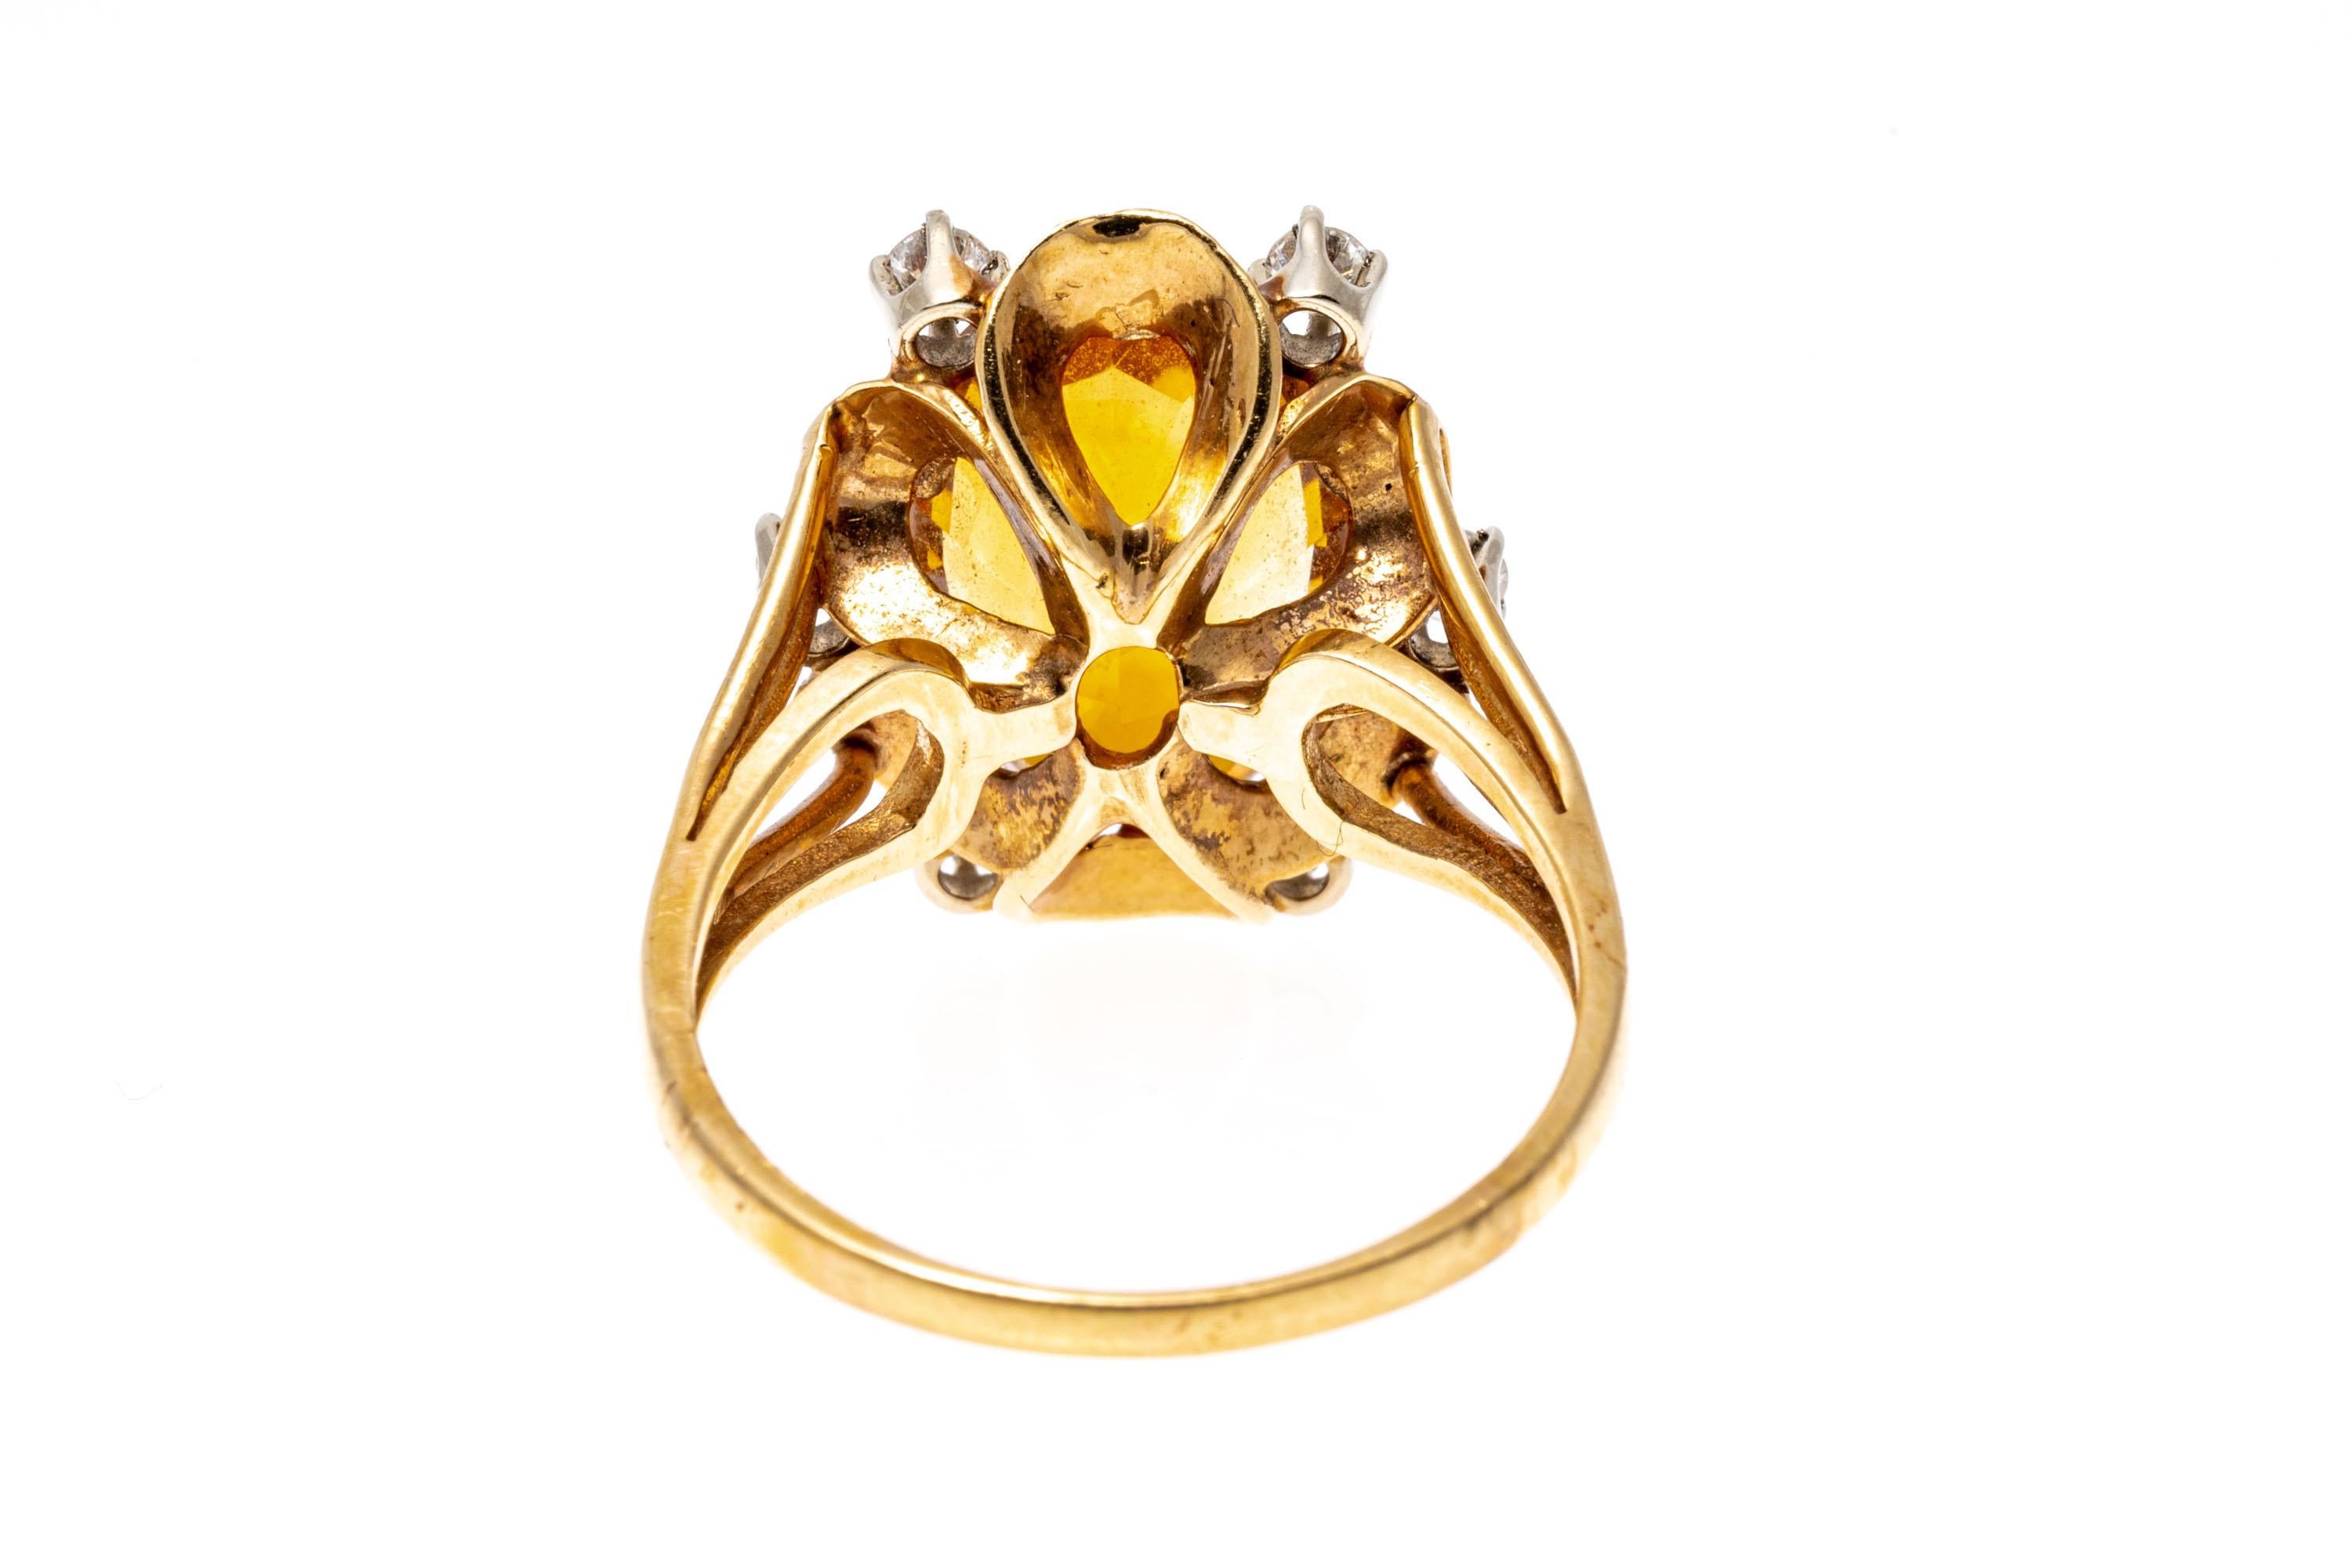 Oval Cut 14k Oval Citrine 'App. 5.10 CTS' And Diamond Scalloped Framed Ring For Sale